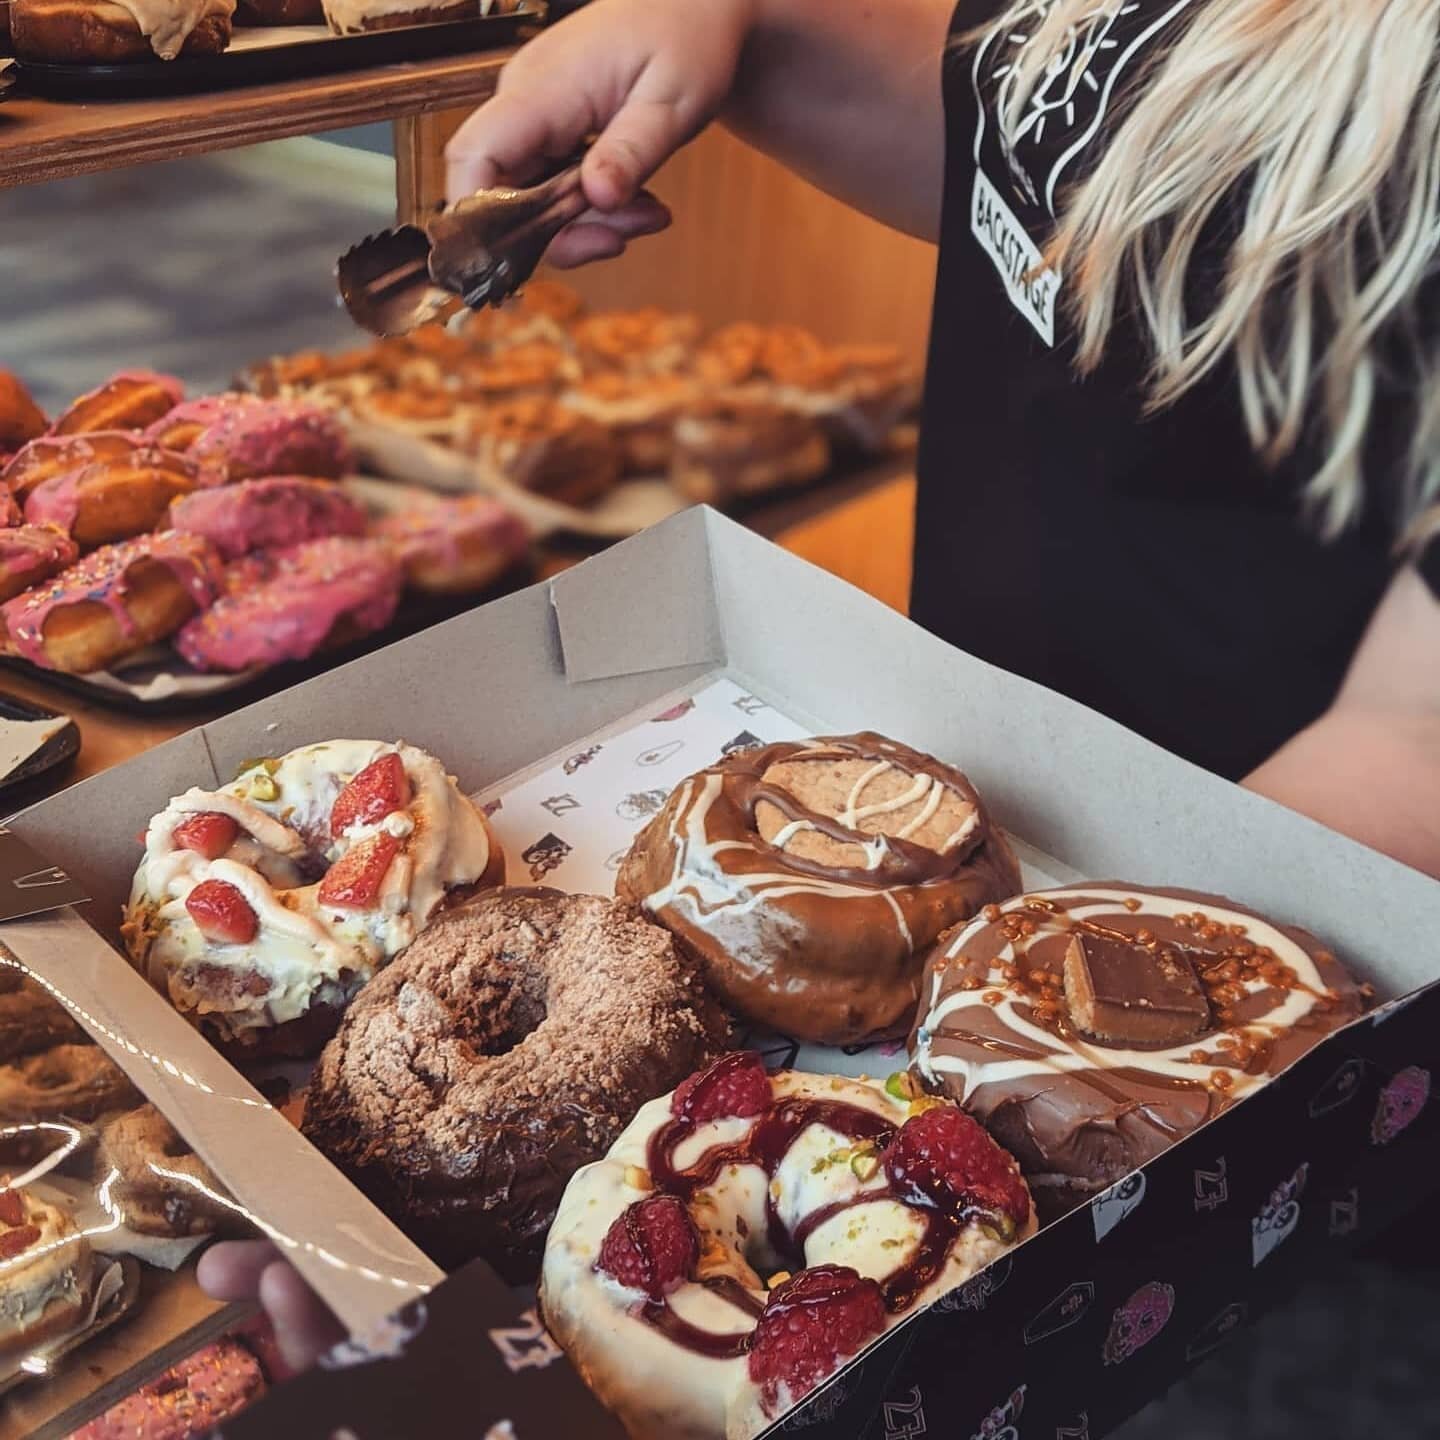 Let your imagination run riot with custom printed food service paper - any design, any colors, any size! Customized specially for your products. ⠀
⠀
#donuts #cafe #donutlove #donutbox #donutsfordays #donutsofinstagram #donuts🍩 #brandedfoodwrap #food